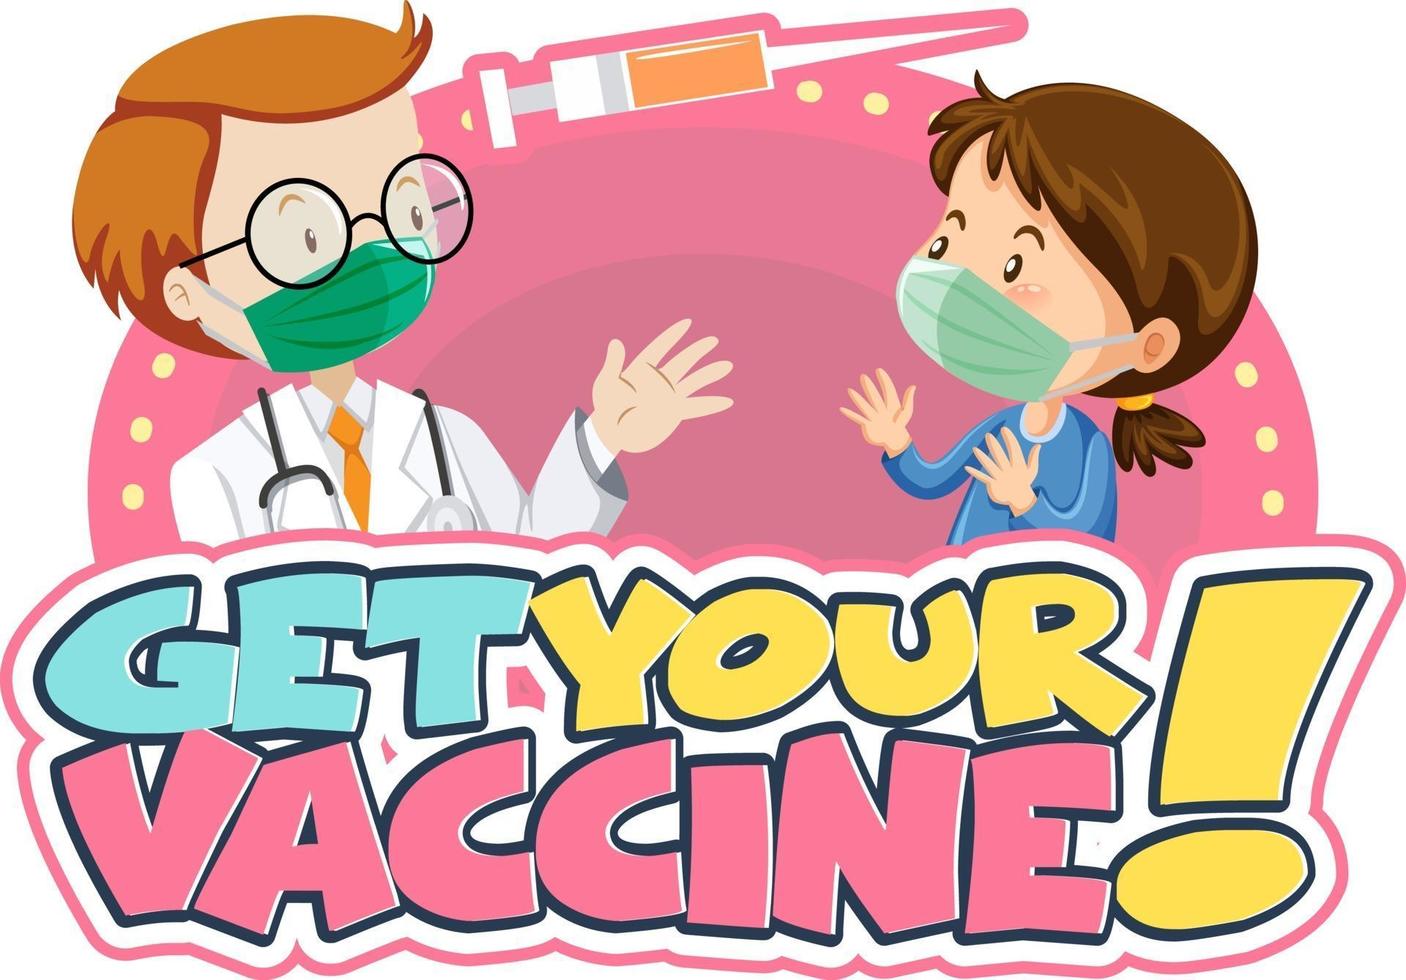 Get Your Vaccine font banner with a girl meets a doctor cartoon character vector